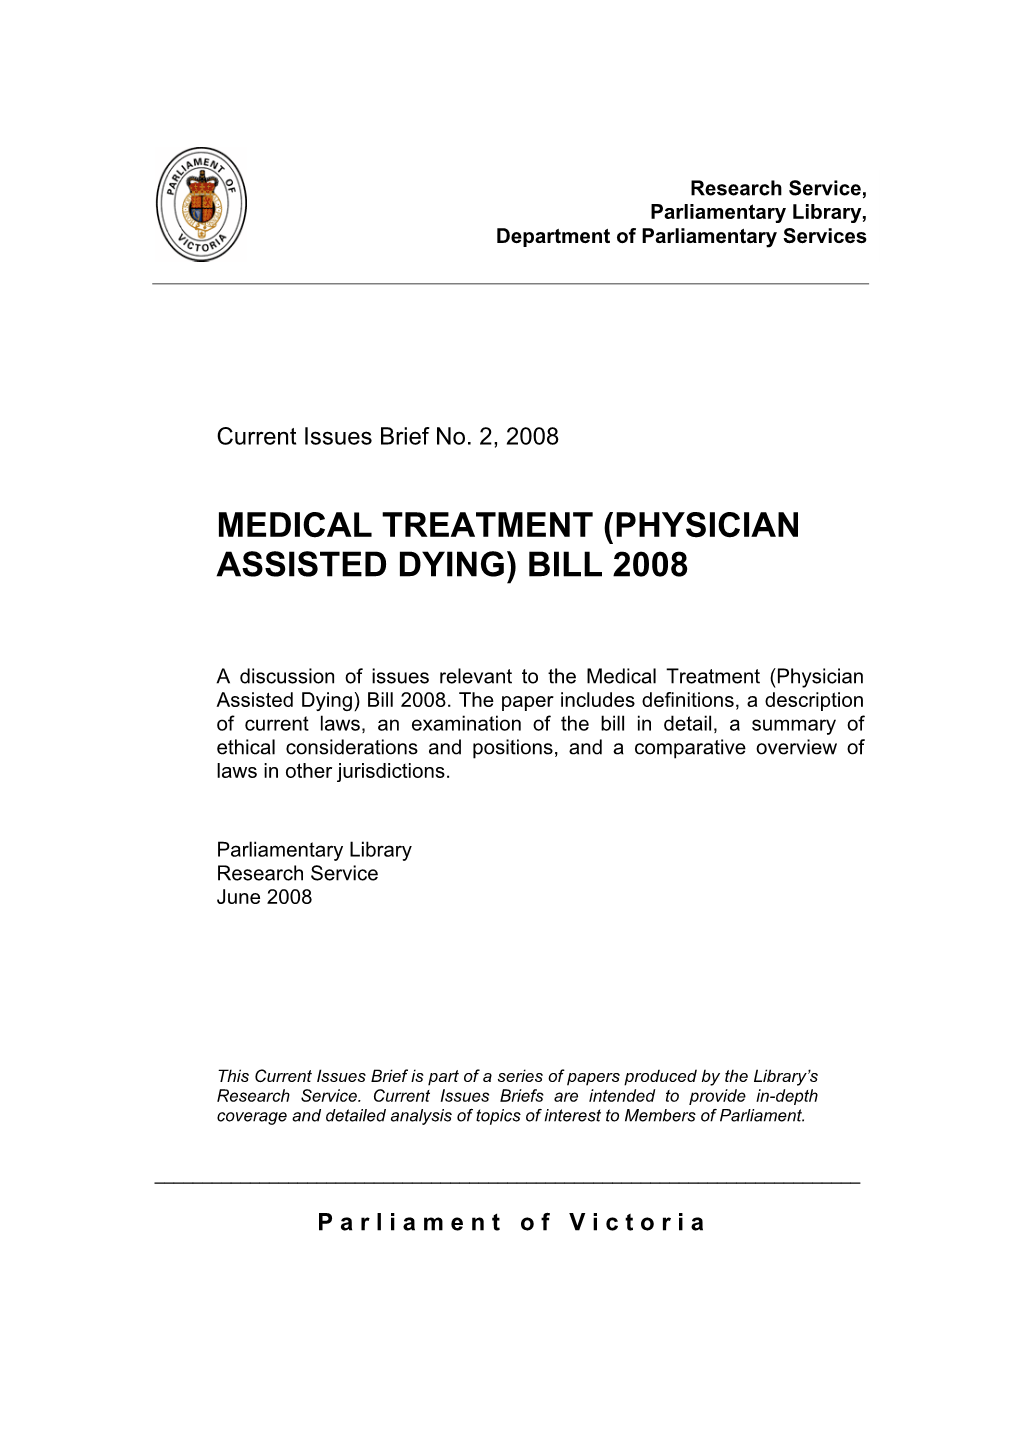 Medical Treatment (Physician Assisted Dying) Bill 2008